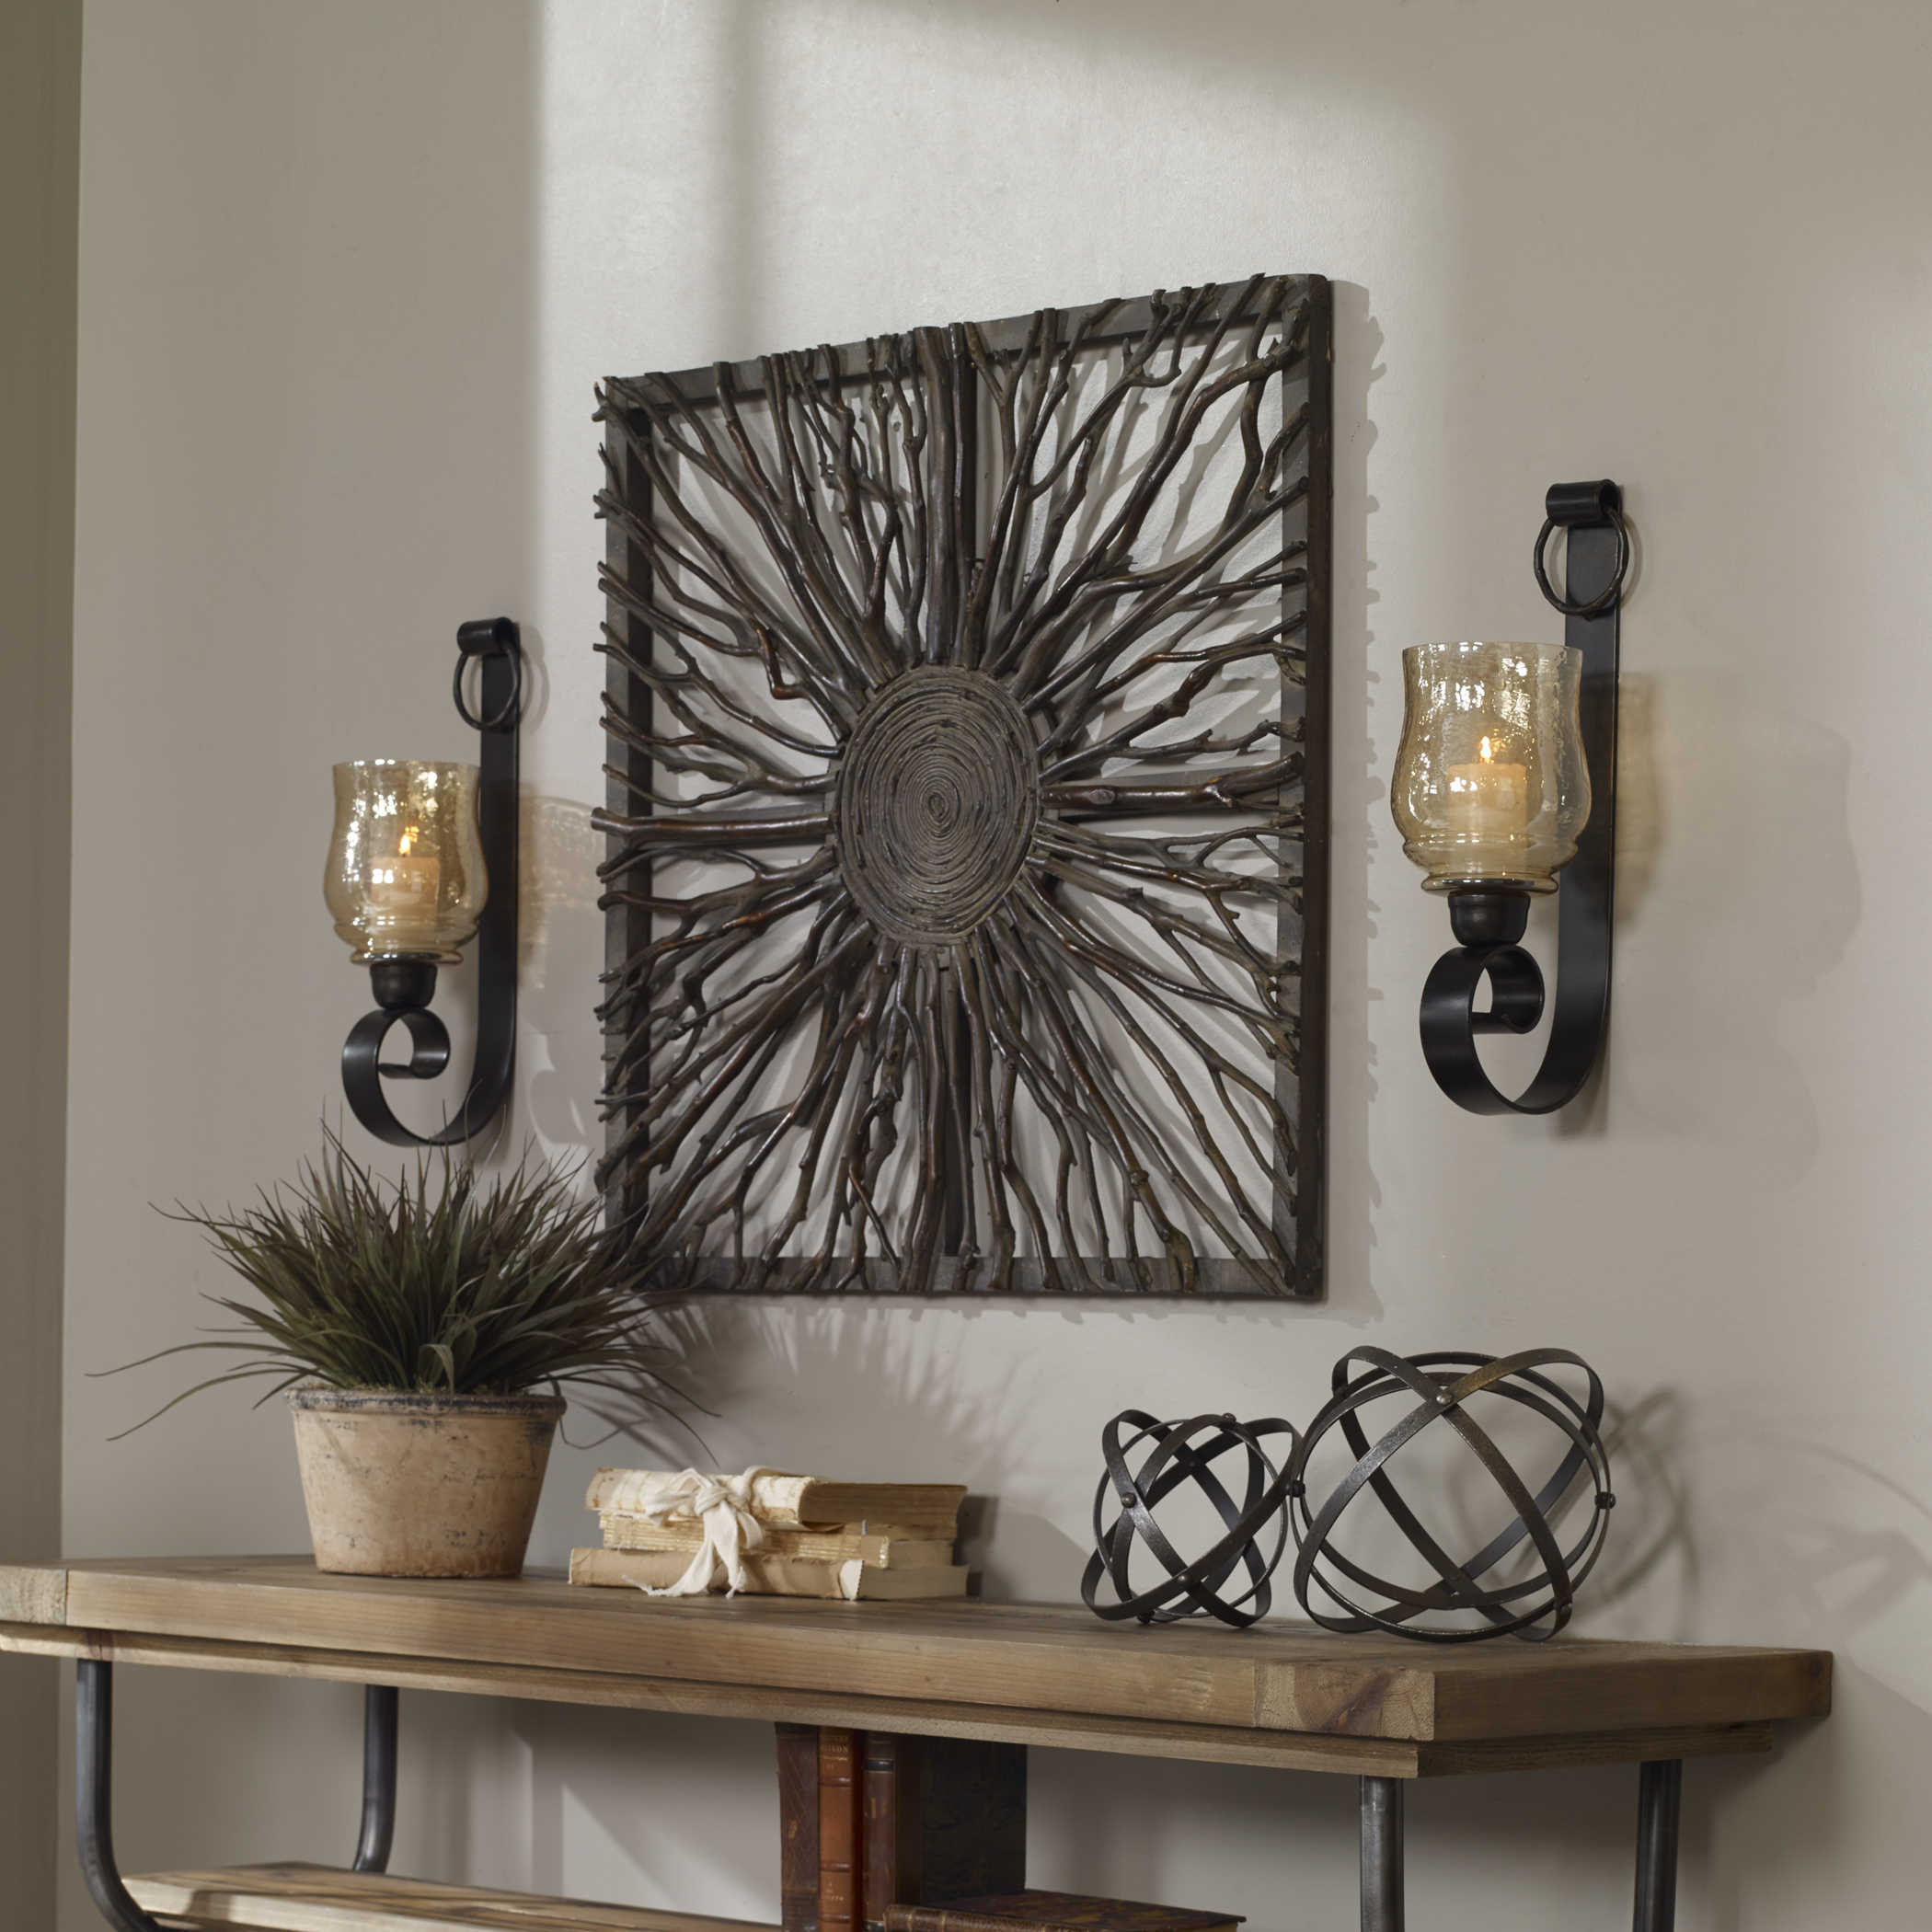 Uttermost Loire Mirrored Wall Sconce 4045 